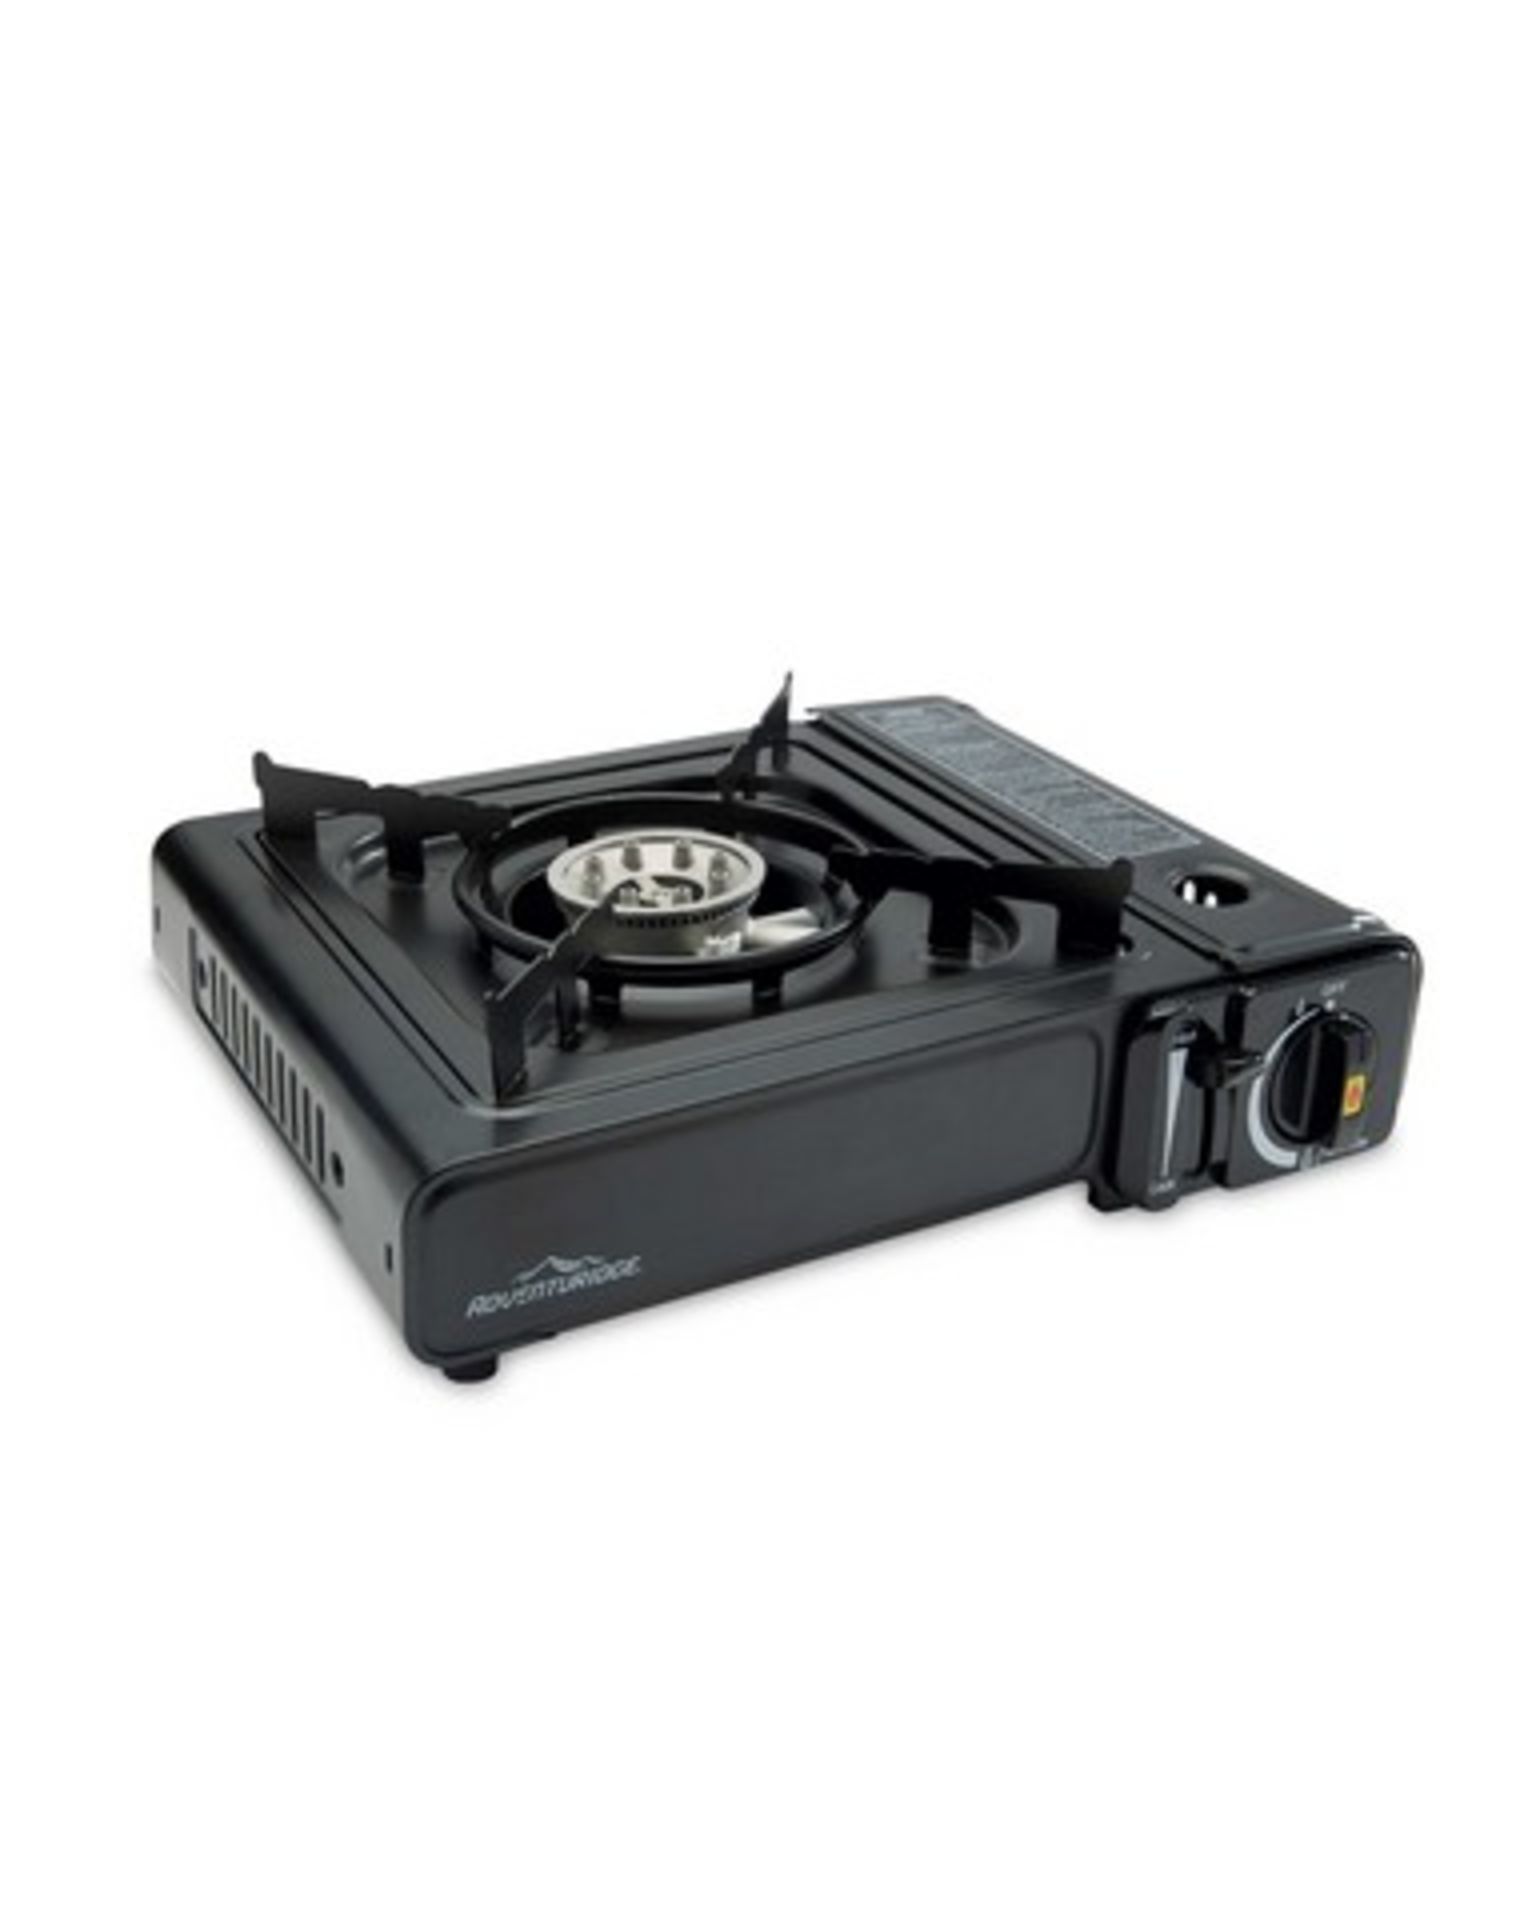 No VAT Brand New Portable Gas Stove - Ideal For Camping - BBQ's And Picnics - Image 2 of 2